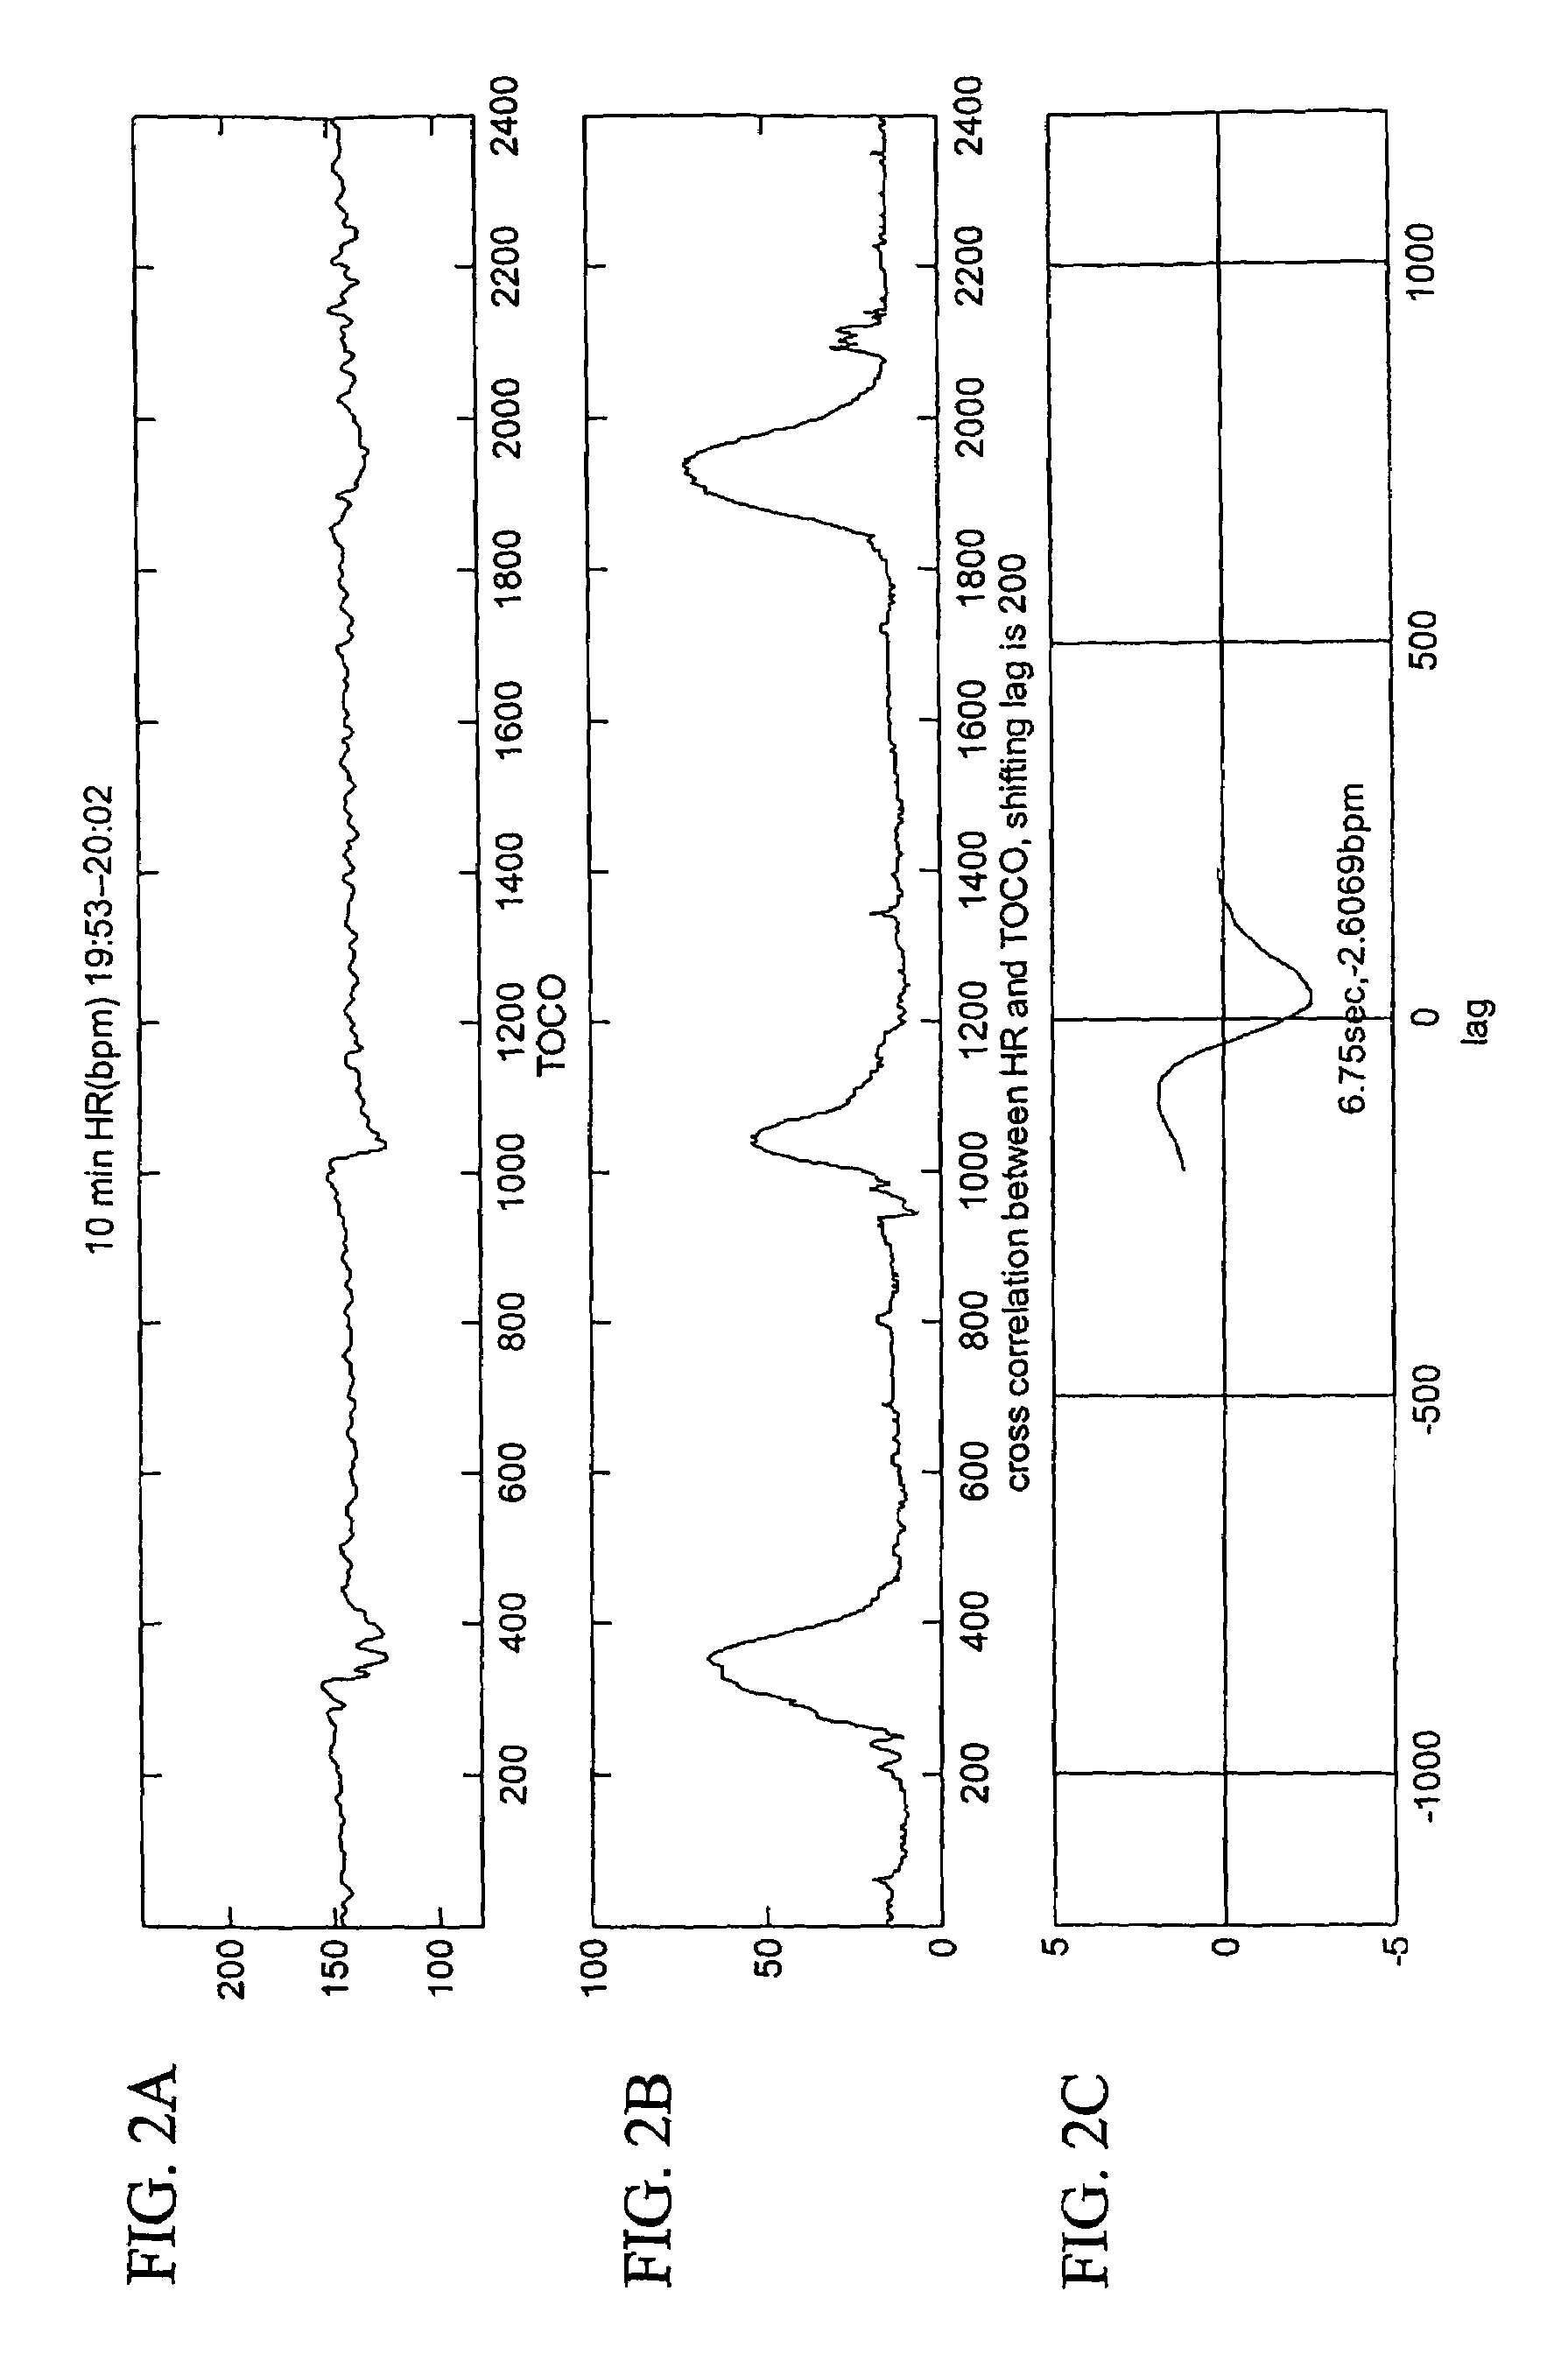 Quantitative fetal heart rate and cardiotocographic monitoring system and related method thereof